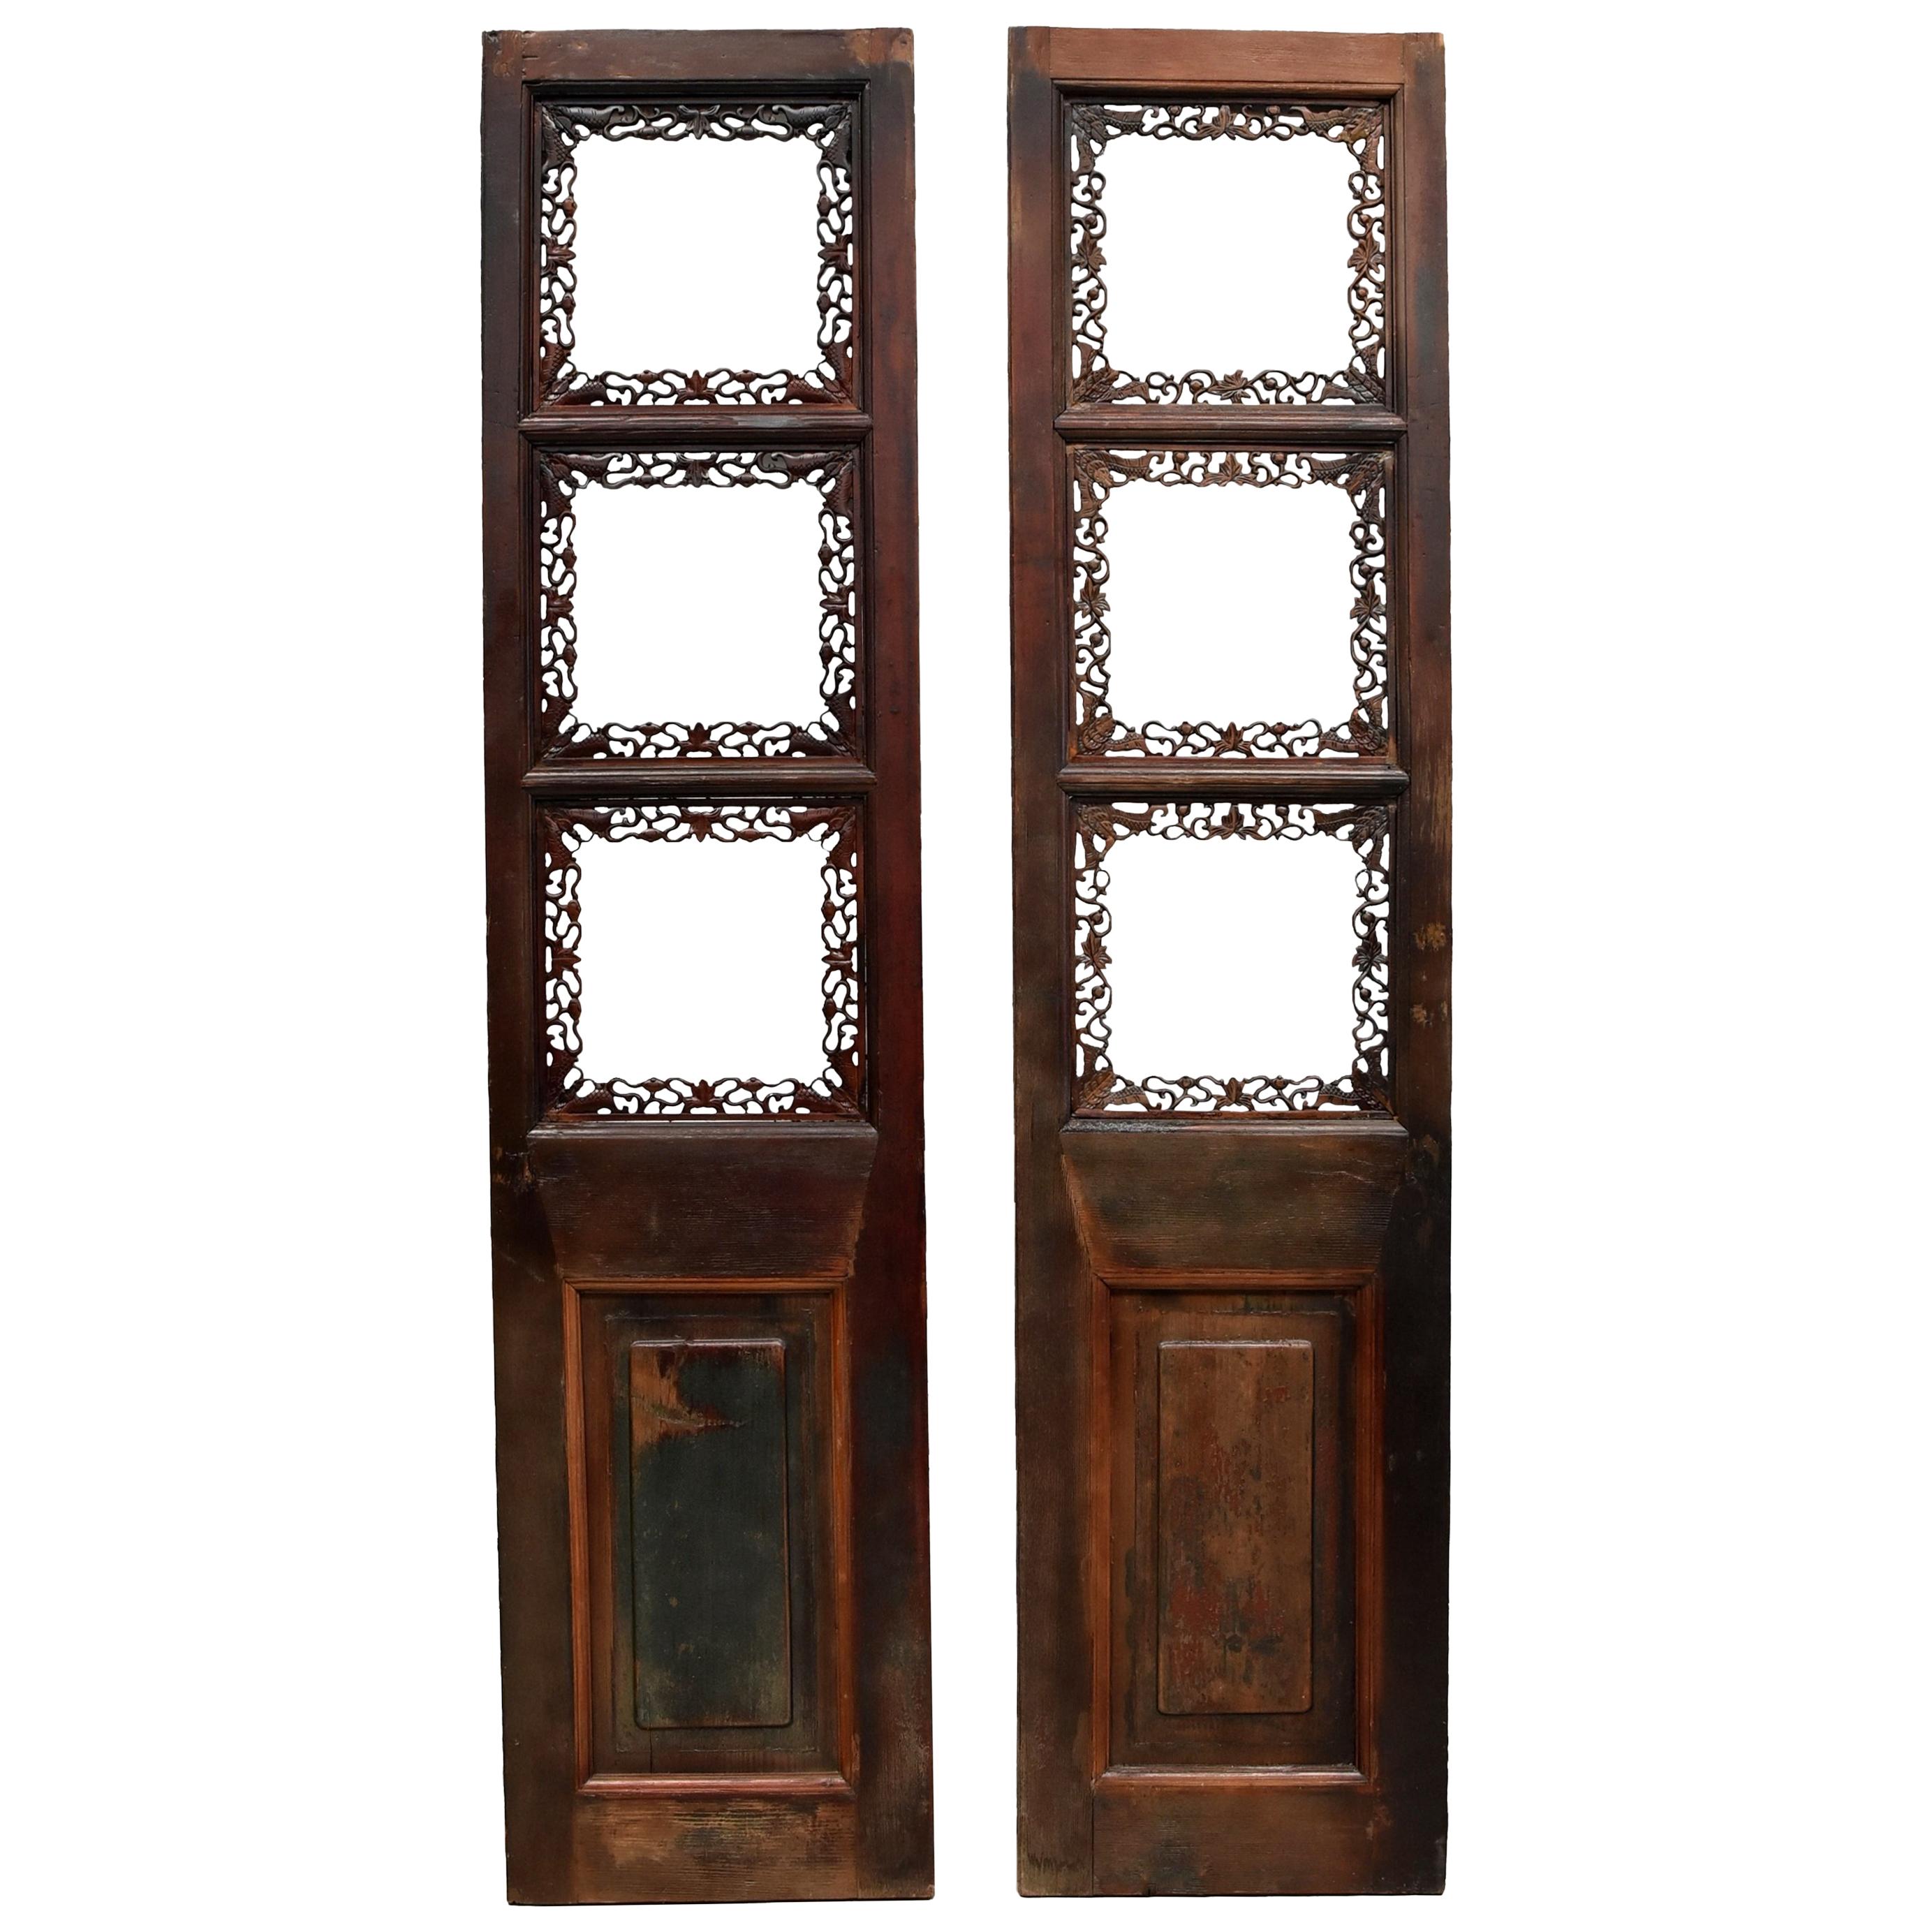 Pair of Finely Carved Chinese Antique Screens, Gourds and Butterflies